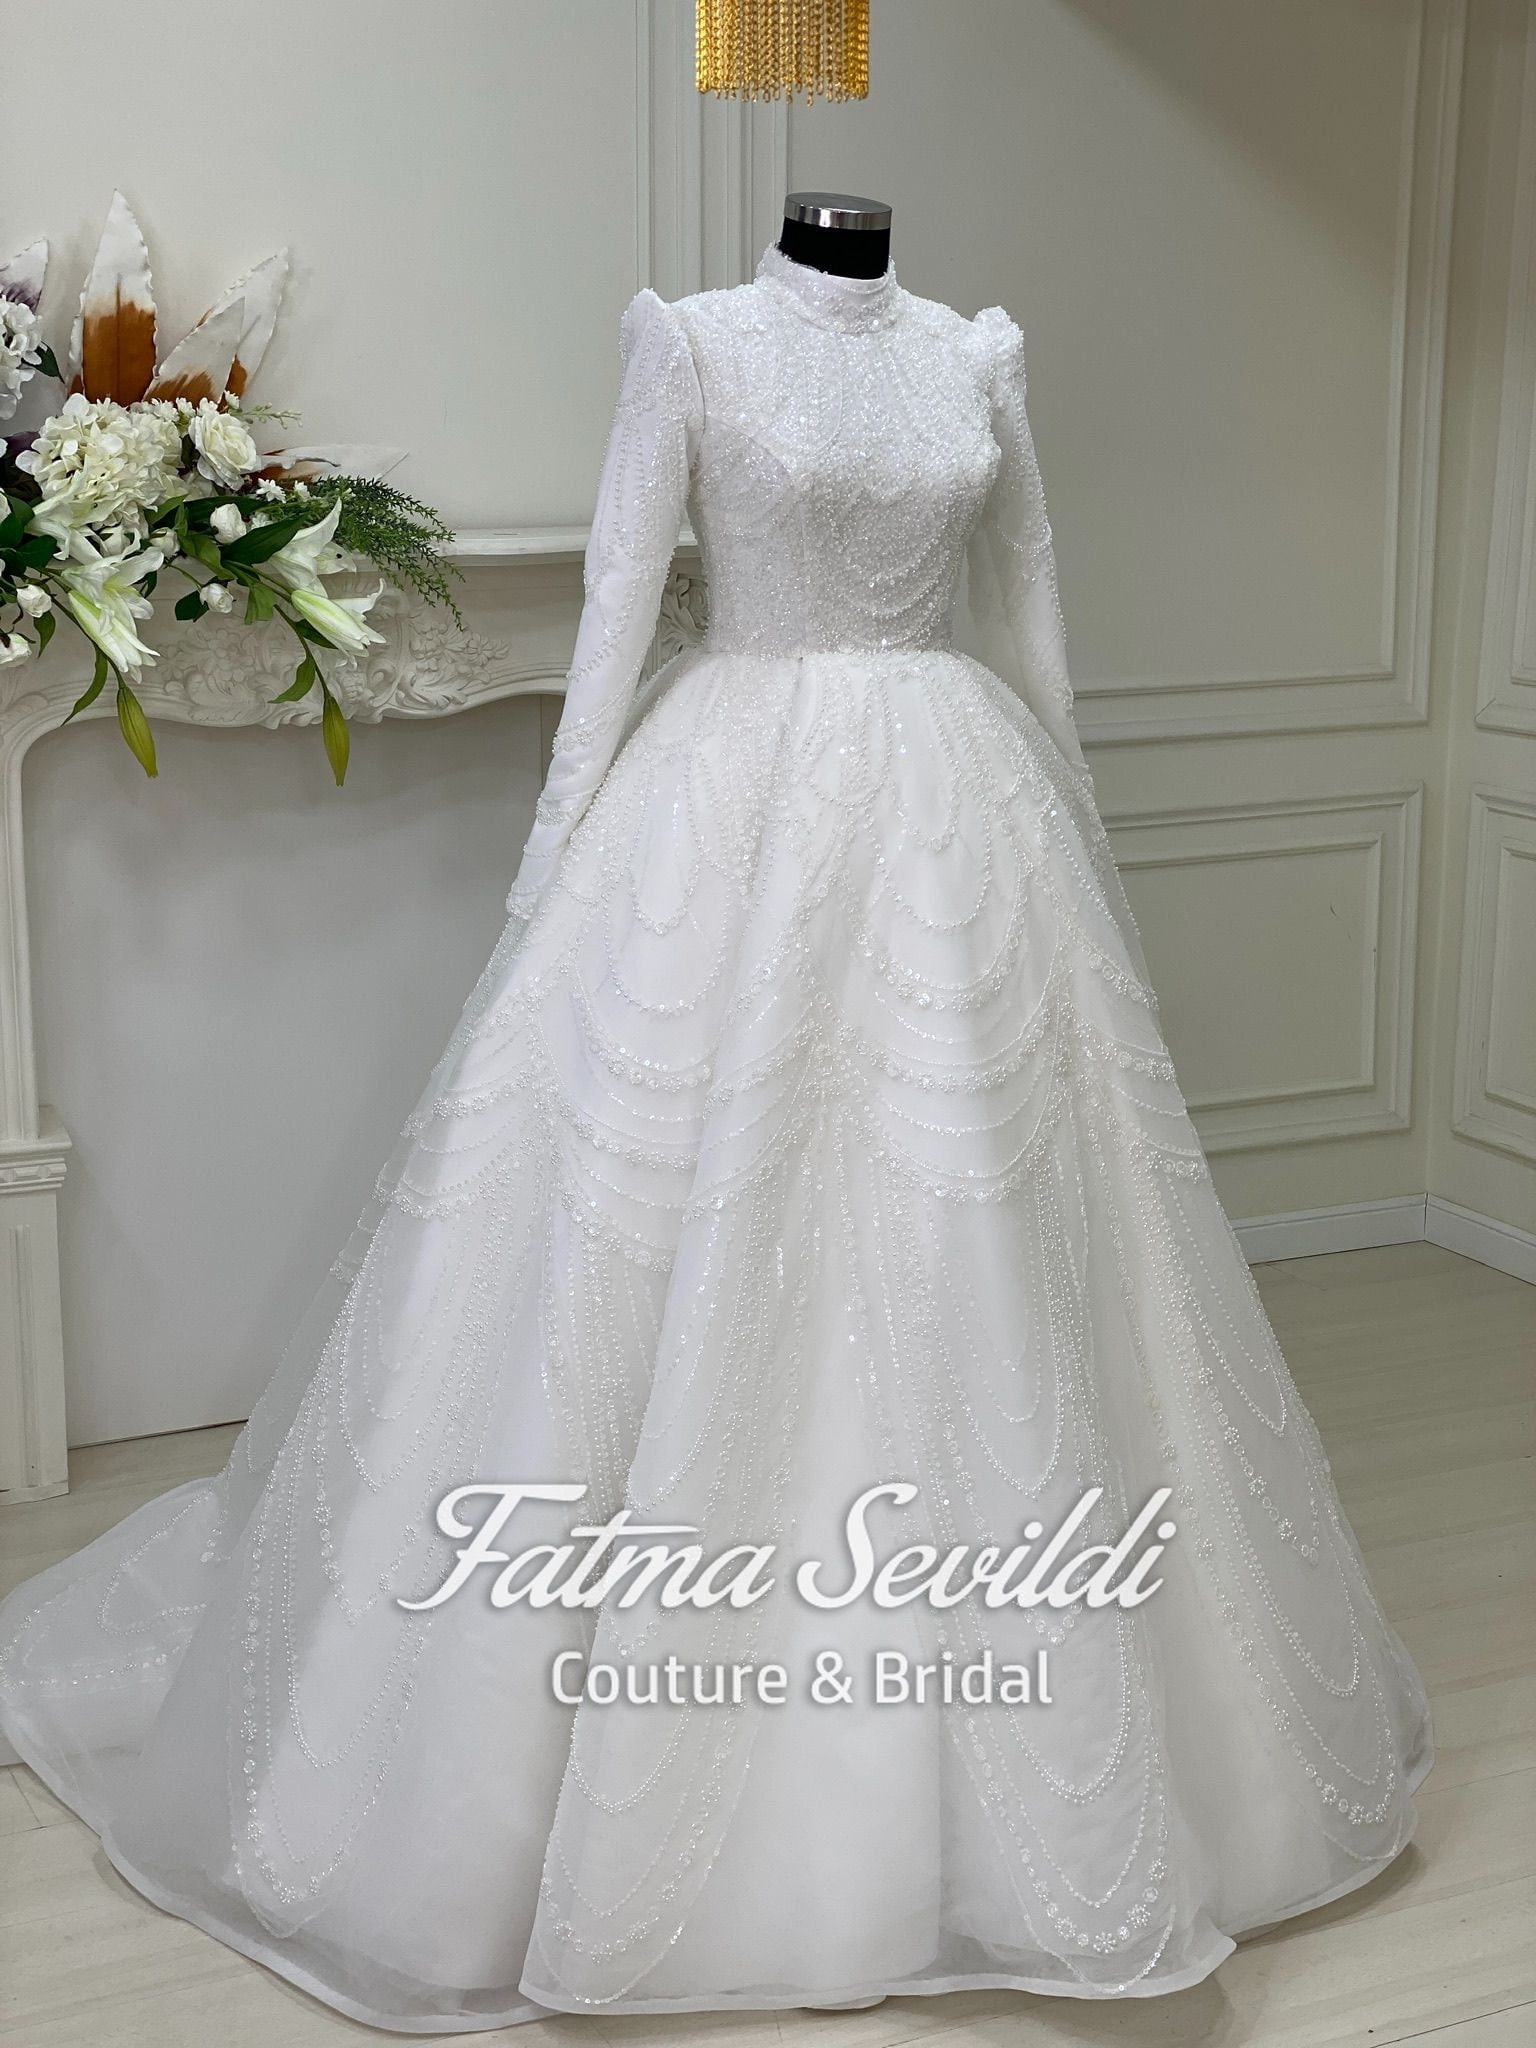 Best Collection of Islamic & Muslim Wedding Dresses & Outfits